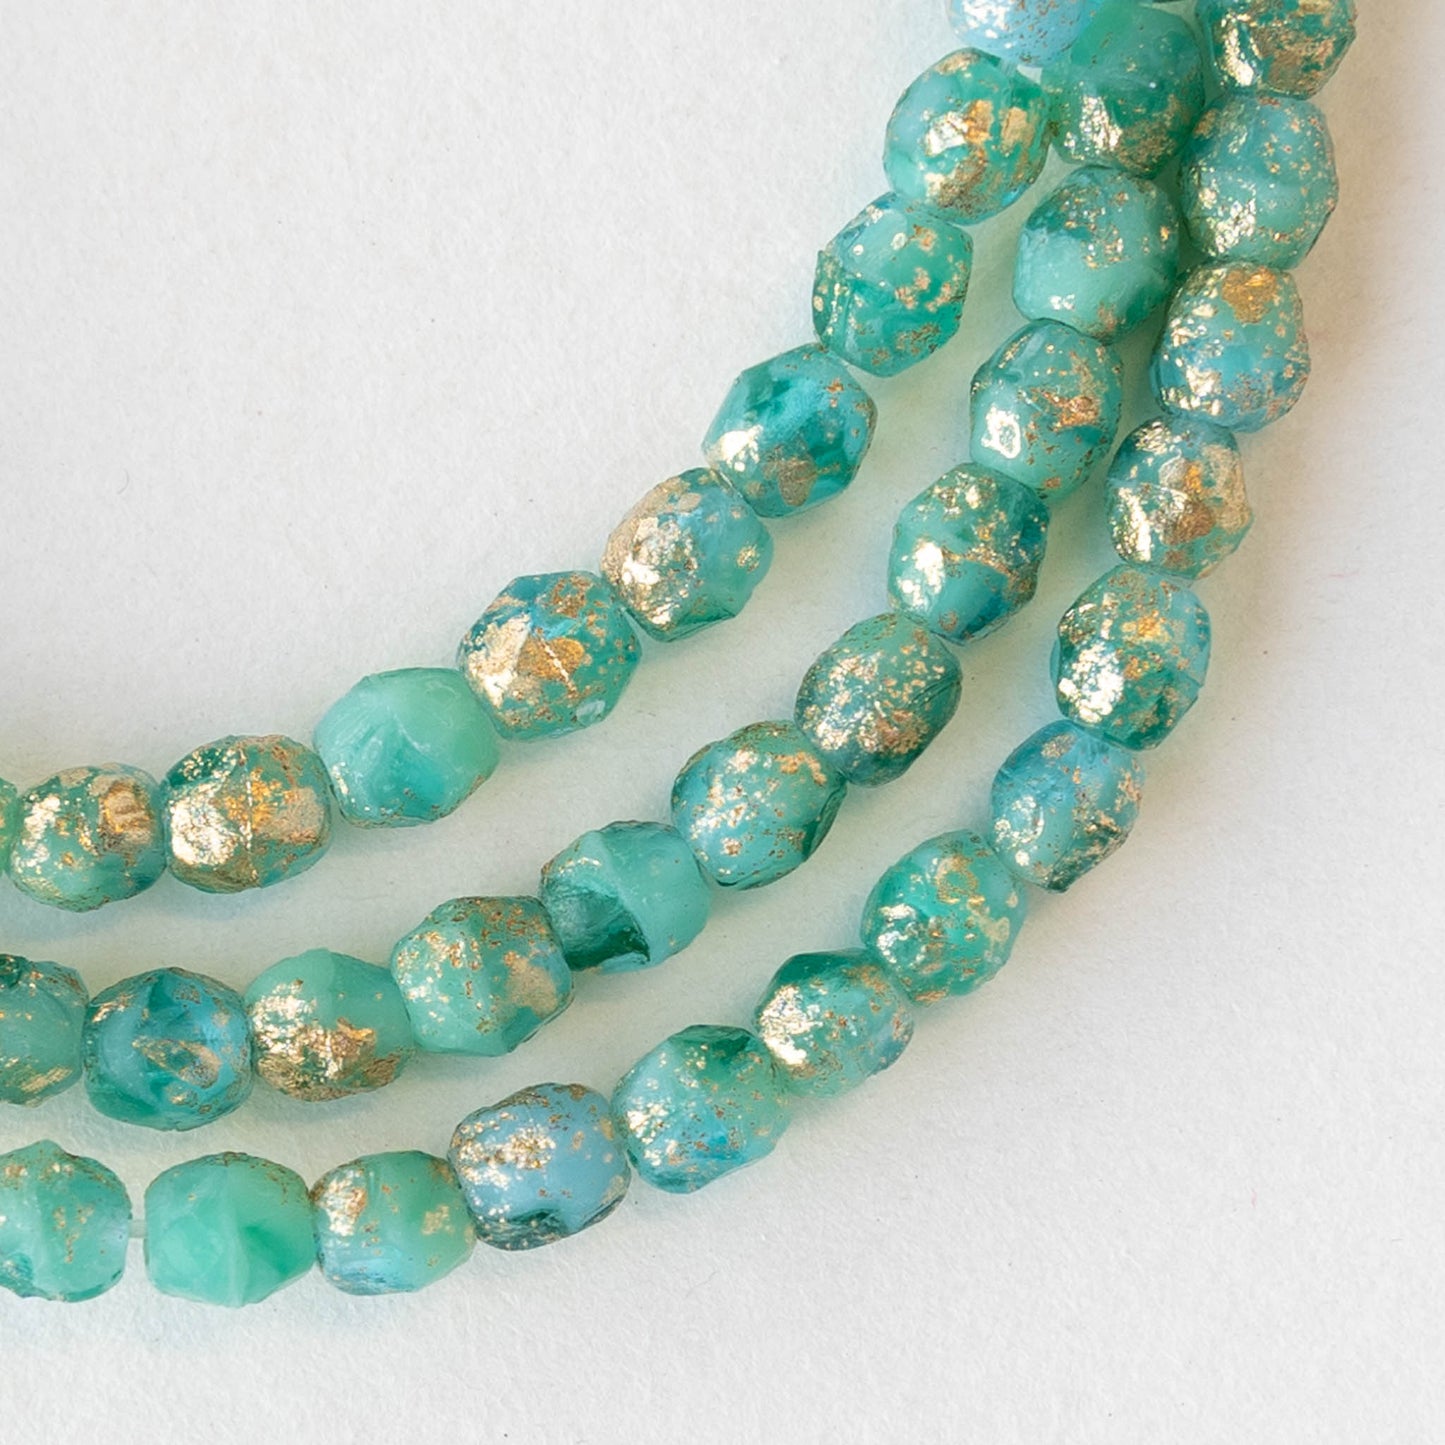 4mm Round Firepolished Beads - Aqua Mix with Gold Dust - 50 Beads